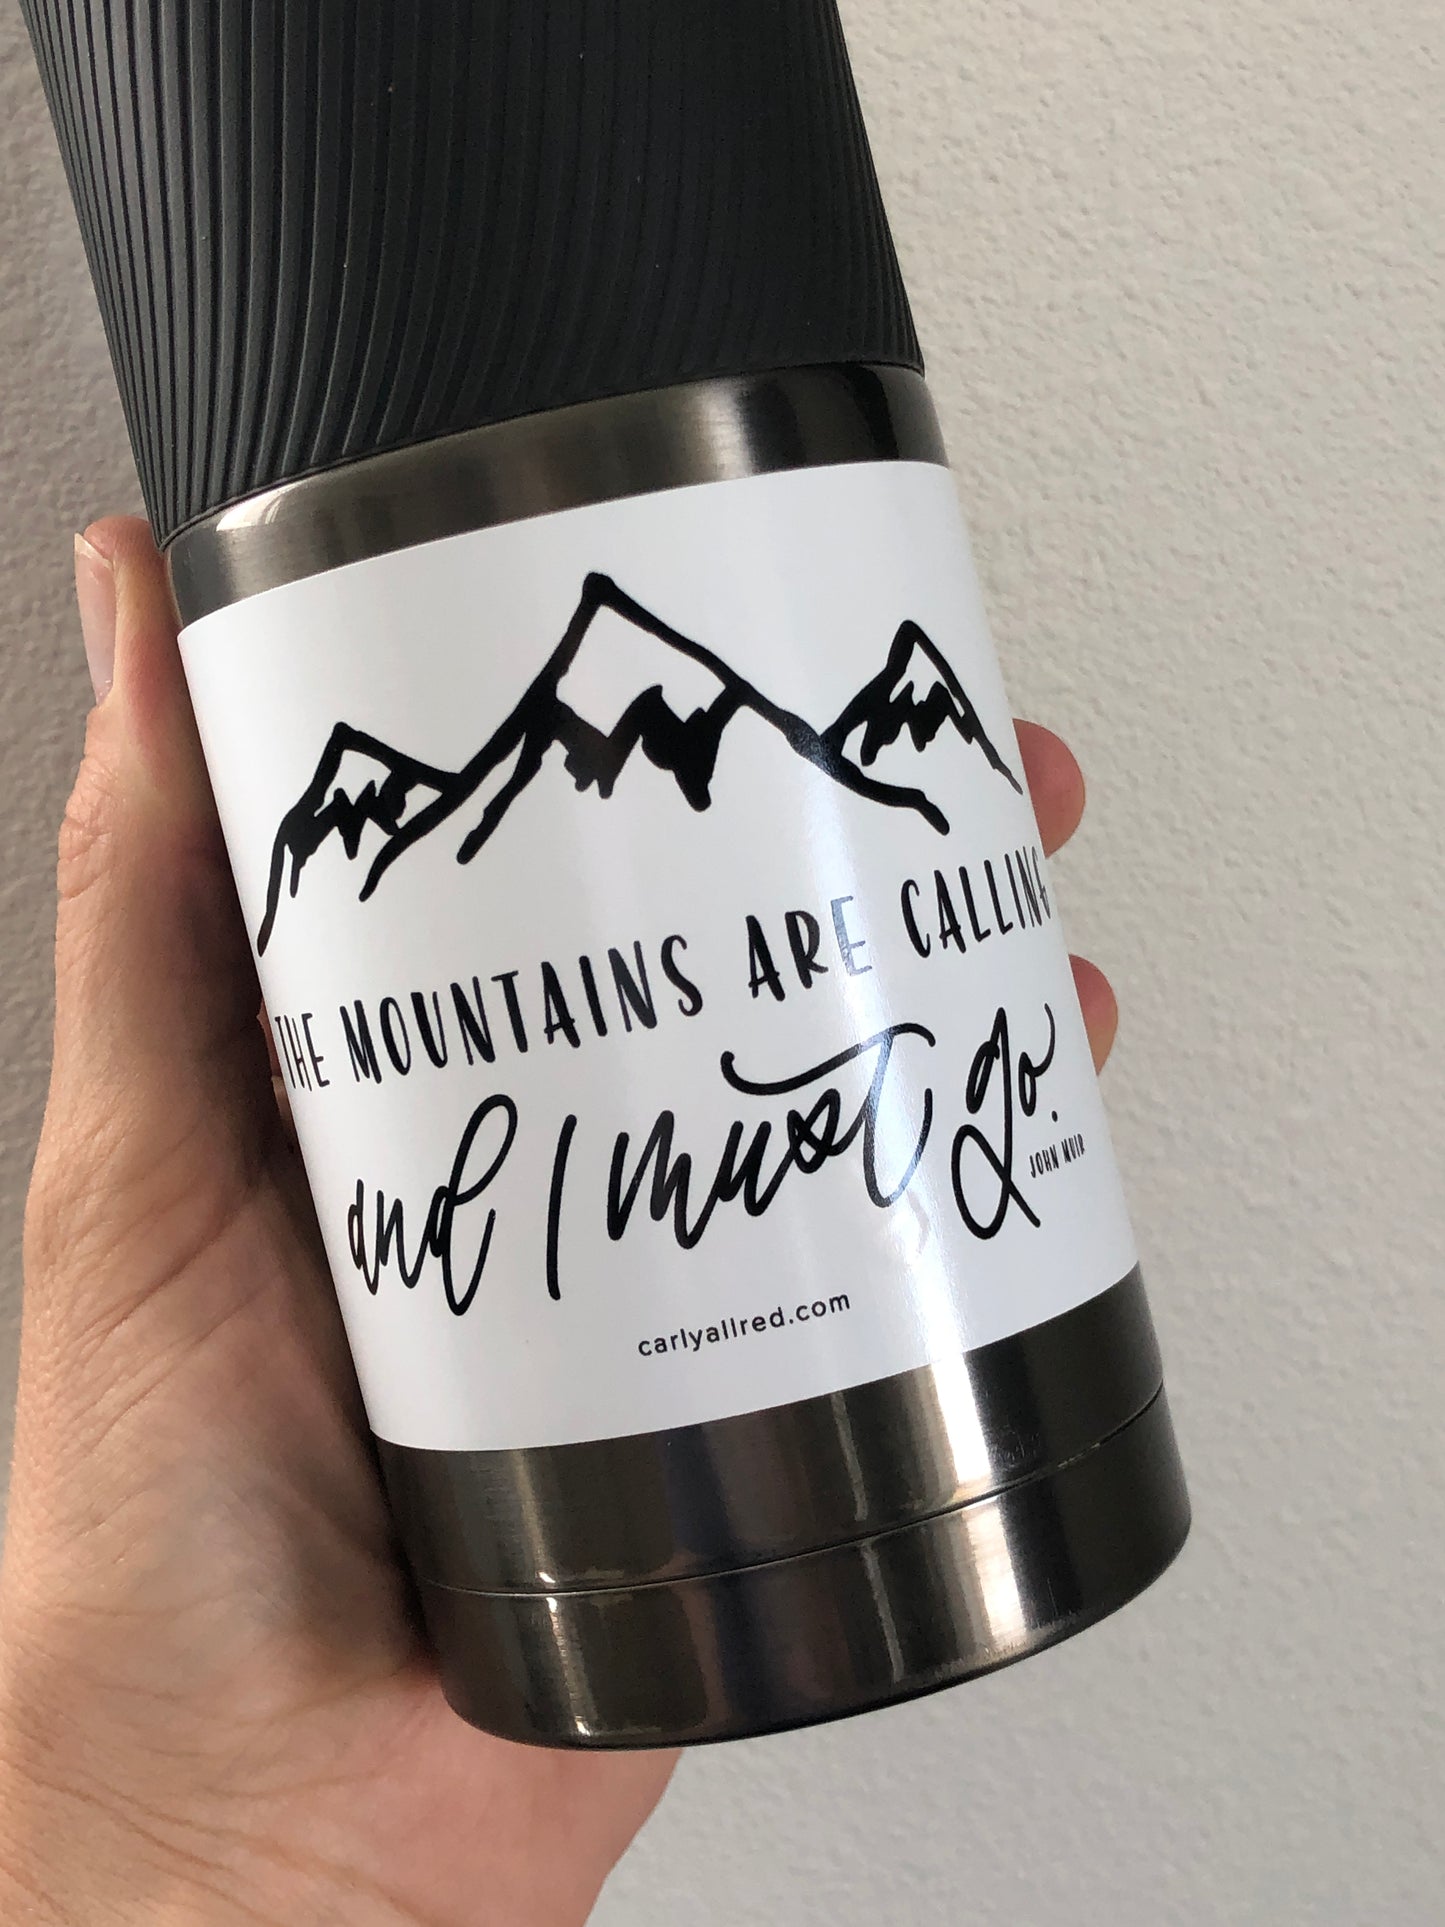 The Mountains Are Calling and I Must Go Sticker